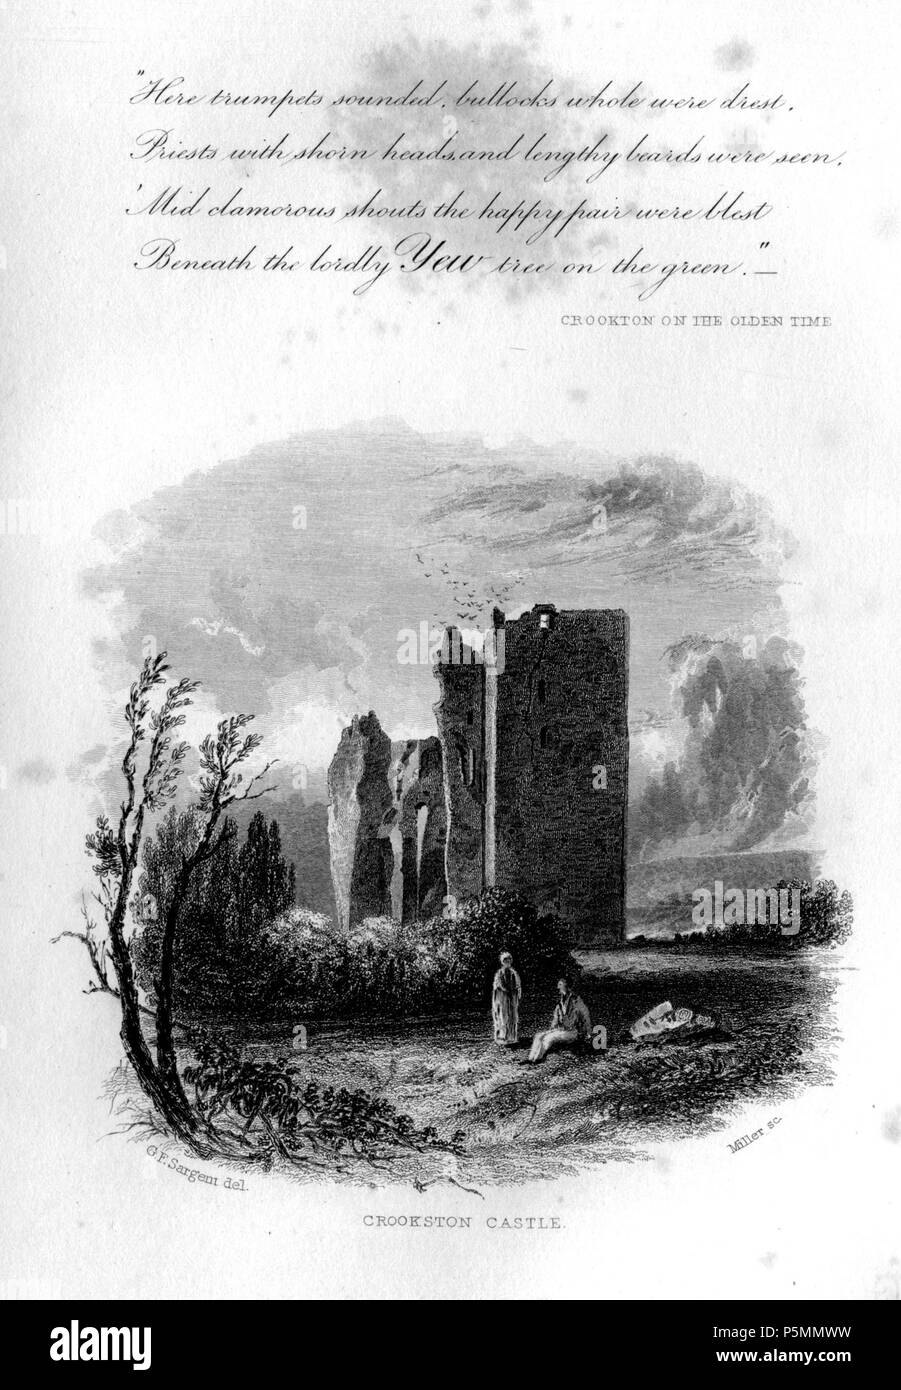 N/A. Crookston Castle engraving by William Miller after G F Sargent (Miller paid £5-5-0 in ii 1832 for engraving), published in The Castles, Palaces and Prisons of Mary of Scotland. Charles Mackie. London. C Cox, 12, King William St, Strand, Oliver & Boyd Edinburgh, David Robertson, Bookseller to the Queen Glasgow, James Chalmers Dundee, & J Robertson Dublin. 1849 . 1832.   William Miller  (1796–1882)     Alternative names William Frederick I Miller; William Frederick, I Miller  Description Scottish engraver  Date of birth/death 28 May 1796 20 January 1882  Location of birth/death Edinburgh Sh Stock Photo